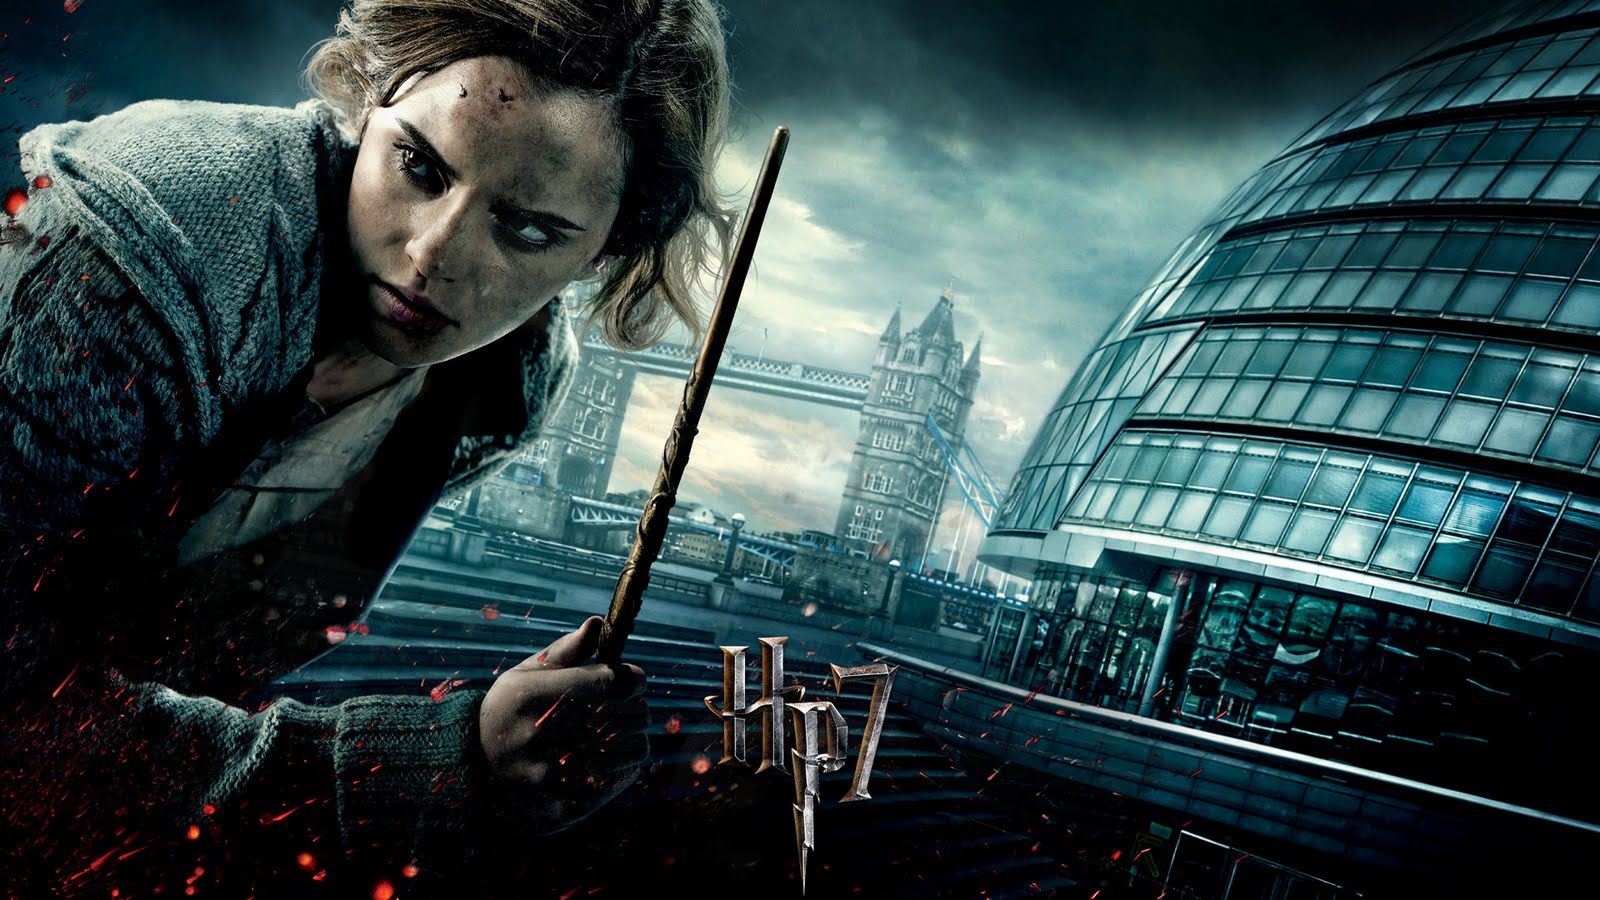 harry potter deathly hallows wallpaper,movie,games,action film,digital compositing,photography